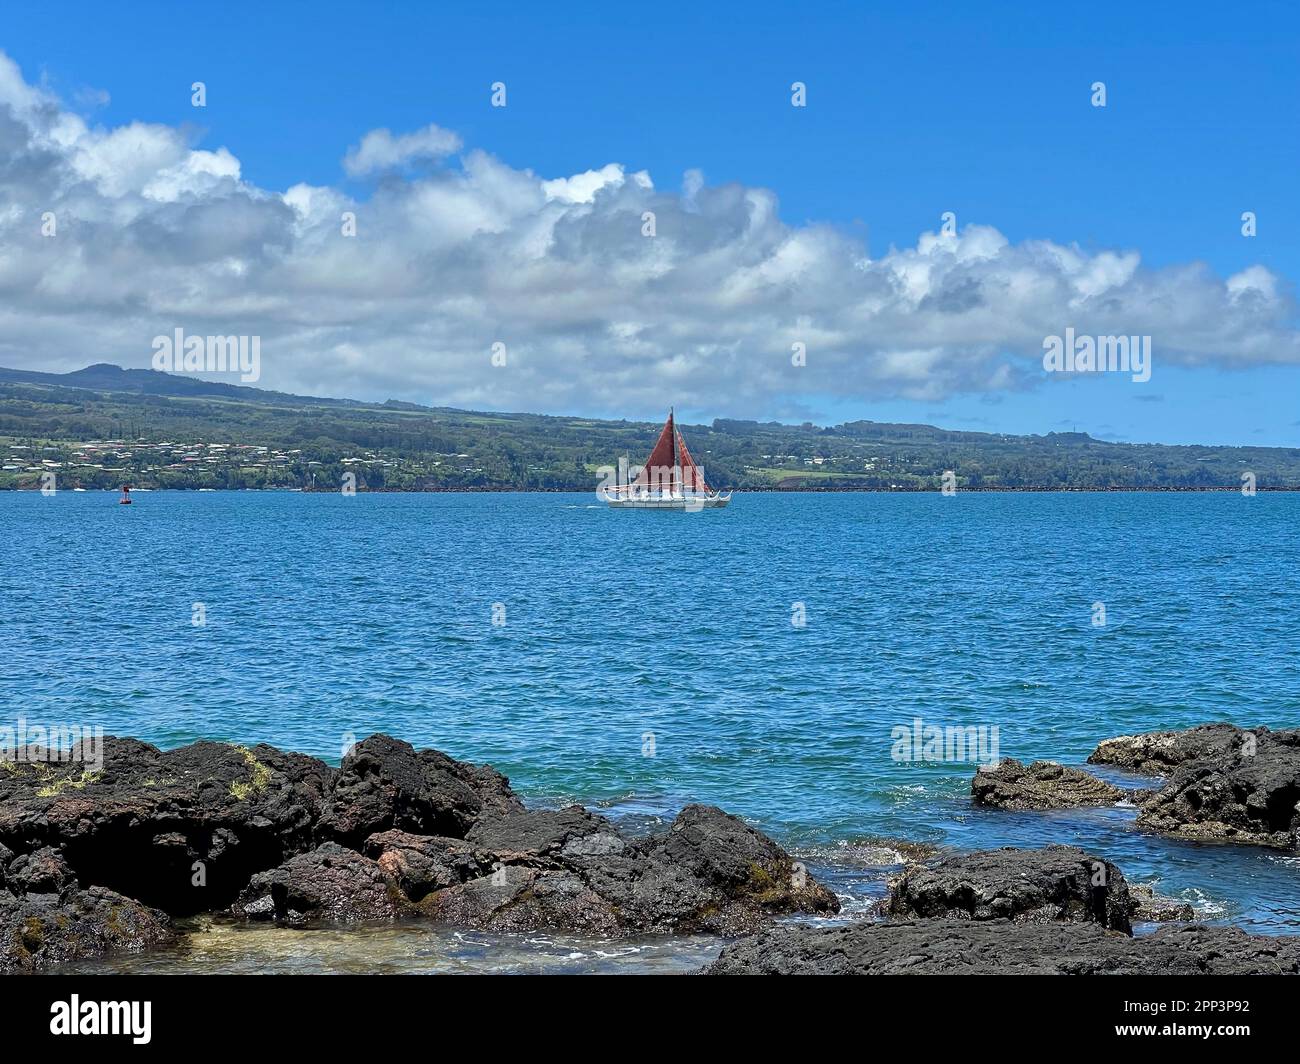 Ancient polynesian outrigger sailing canoe in the Bay of Hilo in Hawaii Stock Photo